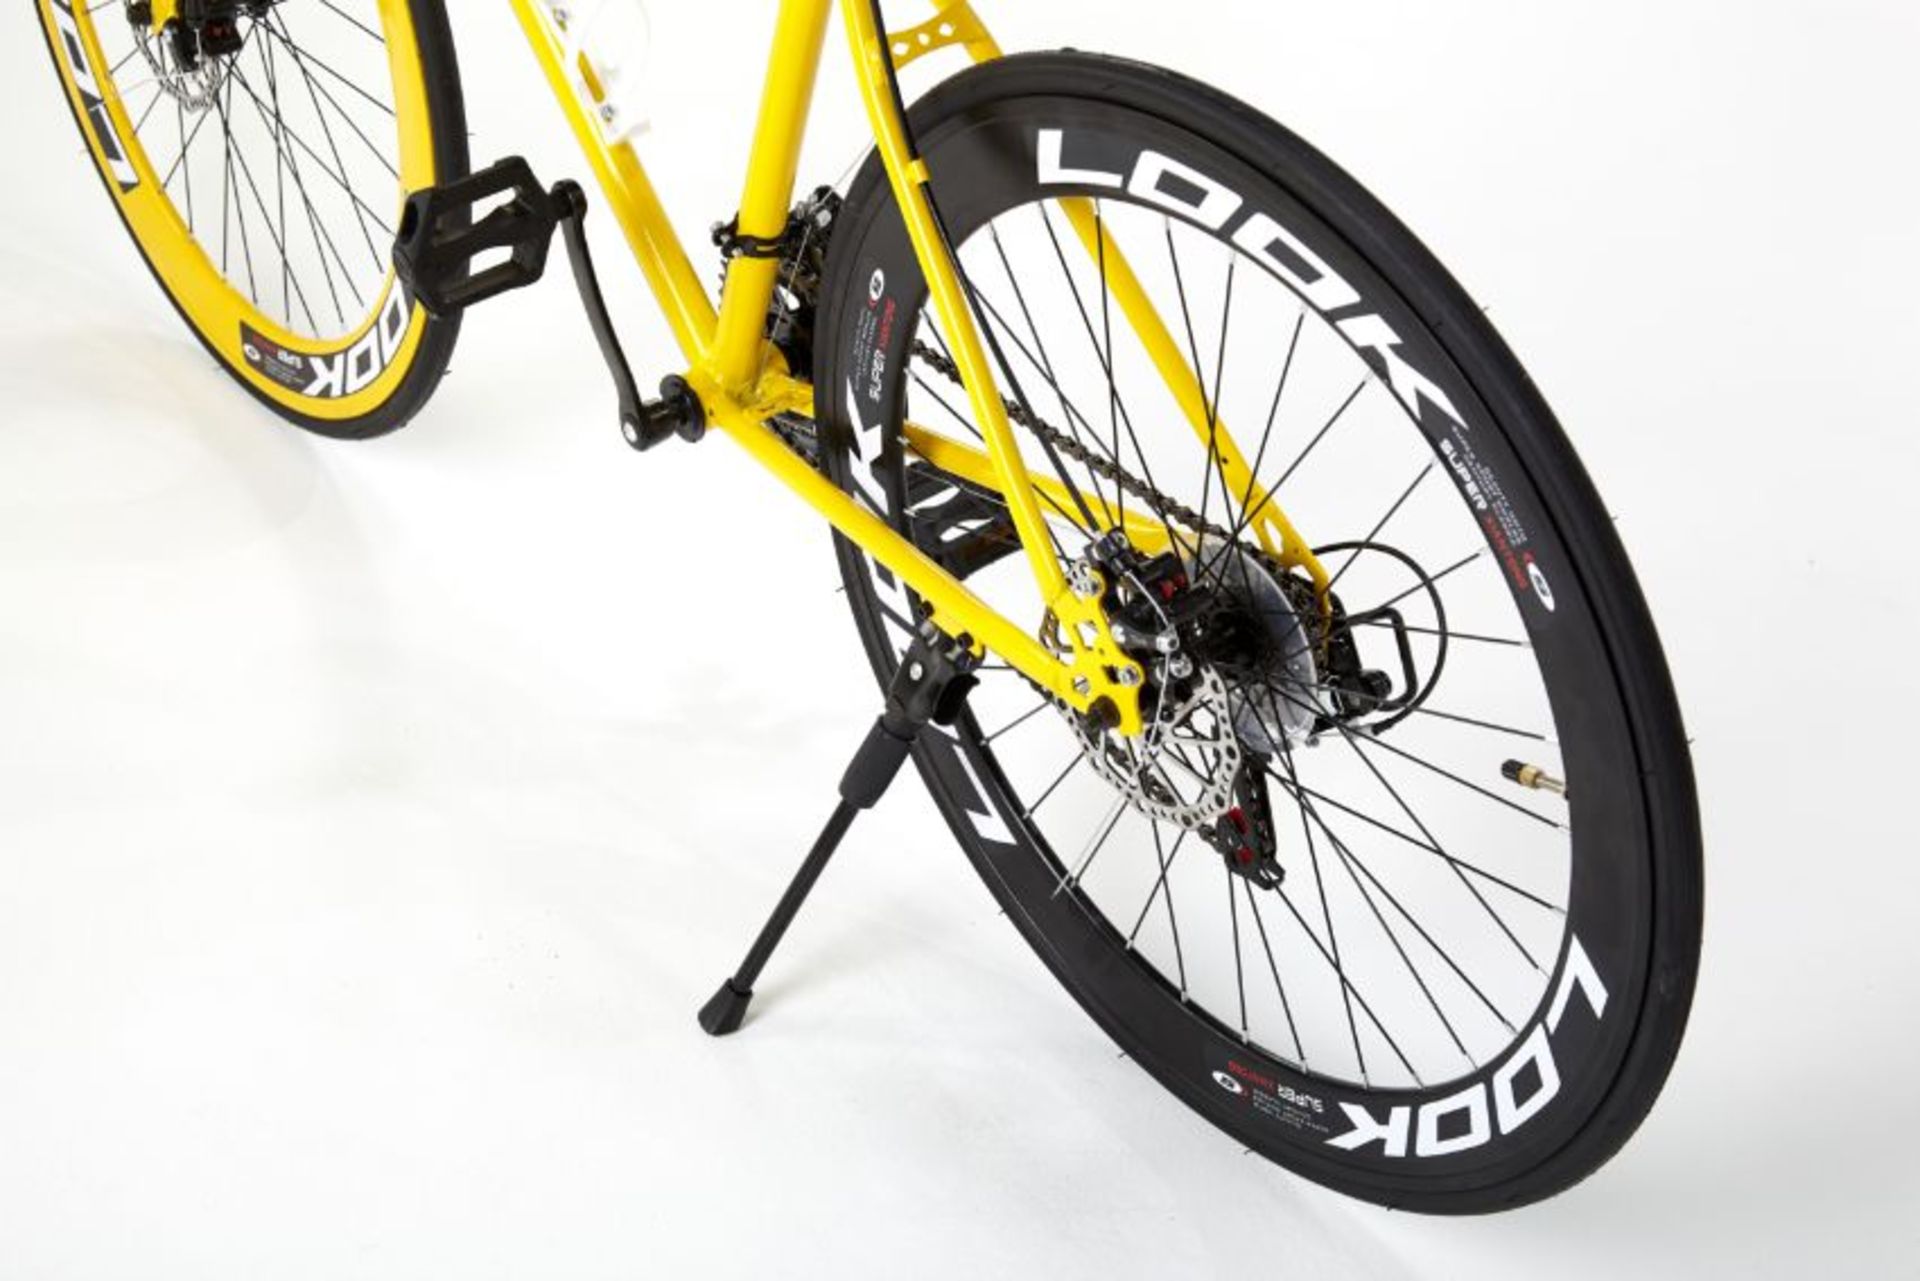 YELLOW STREET BIKE WITH 21 GREAR, BRAKE DISKS, KICK STAND, COOL THIN TYRES - Image 12 of 12